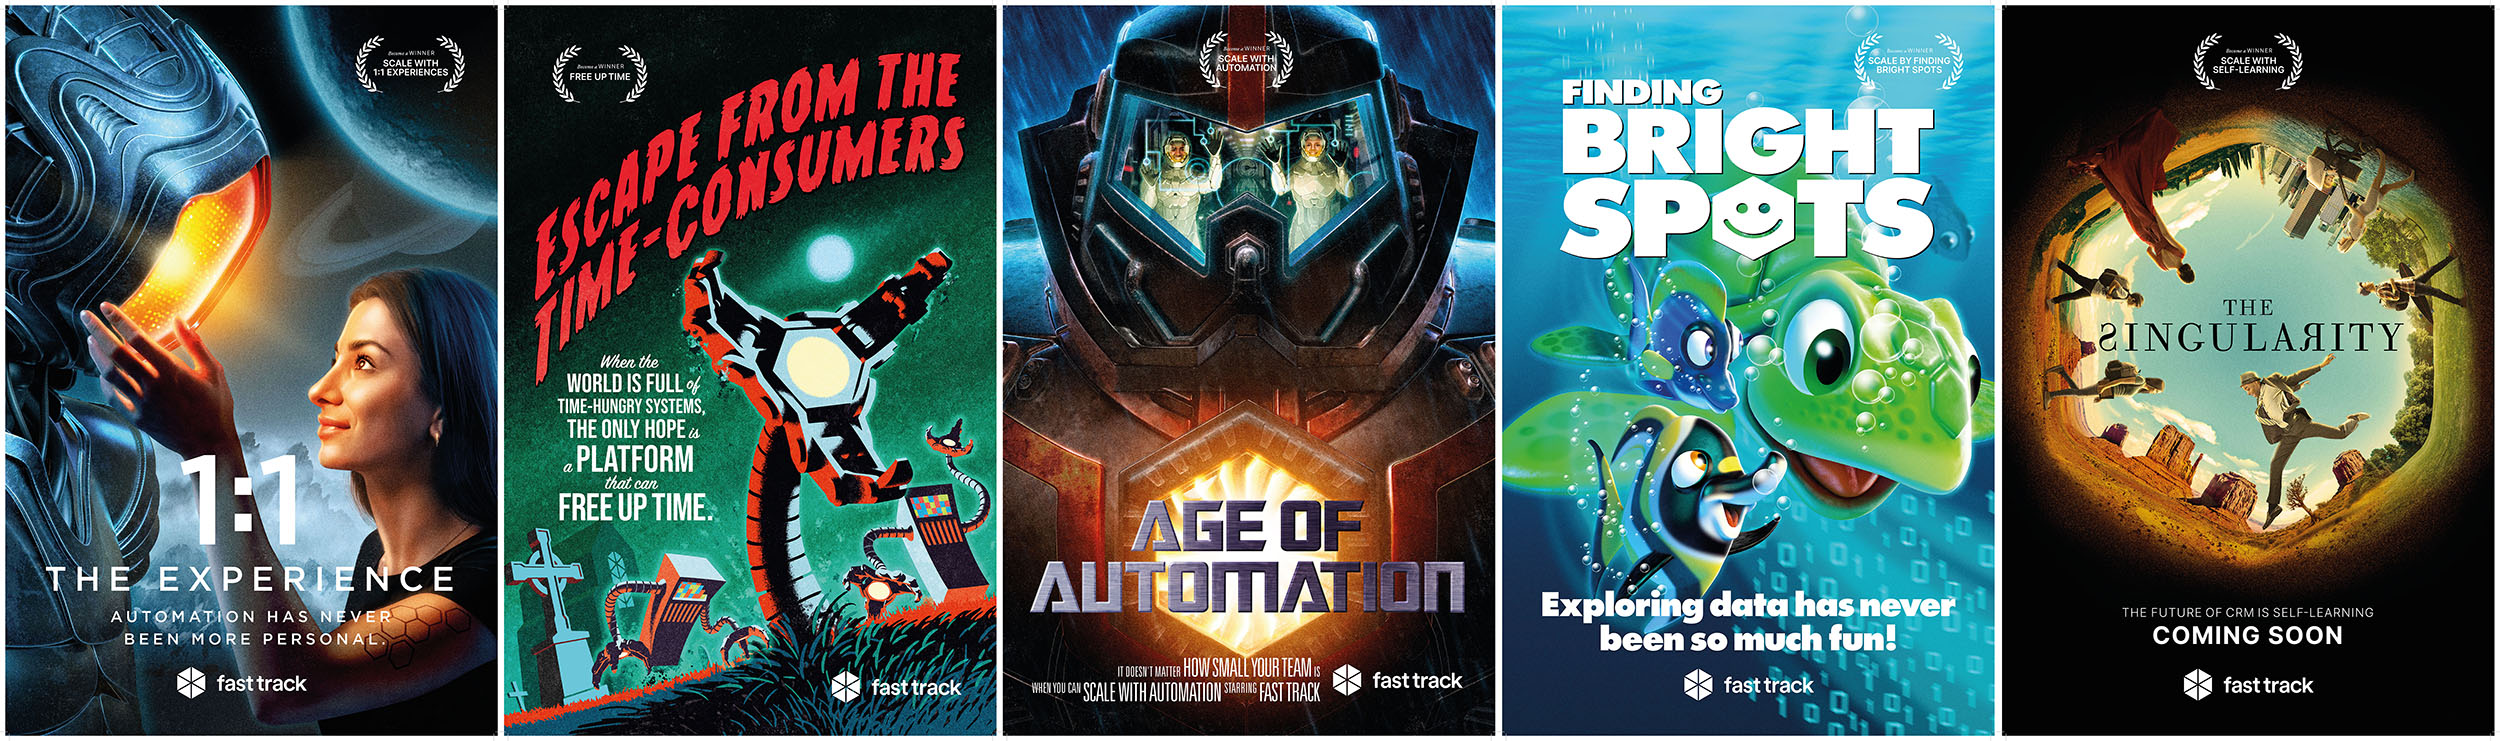 Fast track solutions Movie posters robots fish